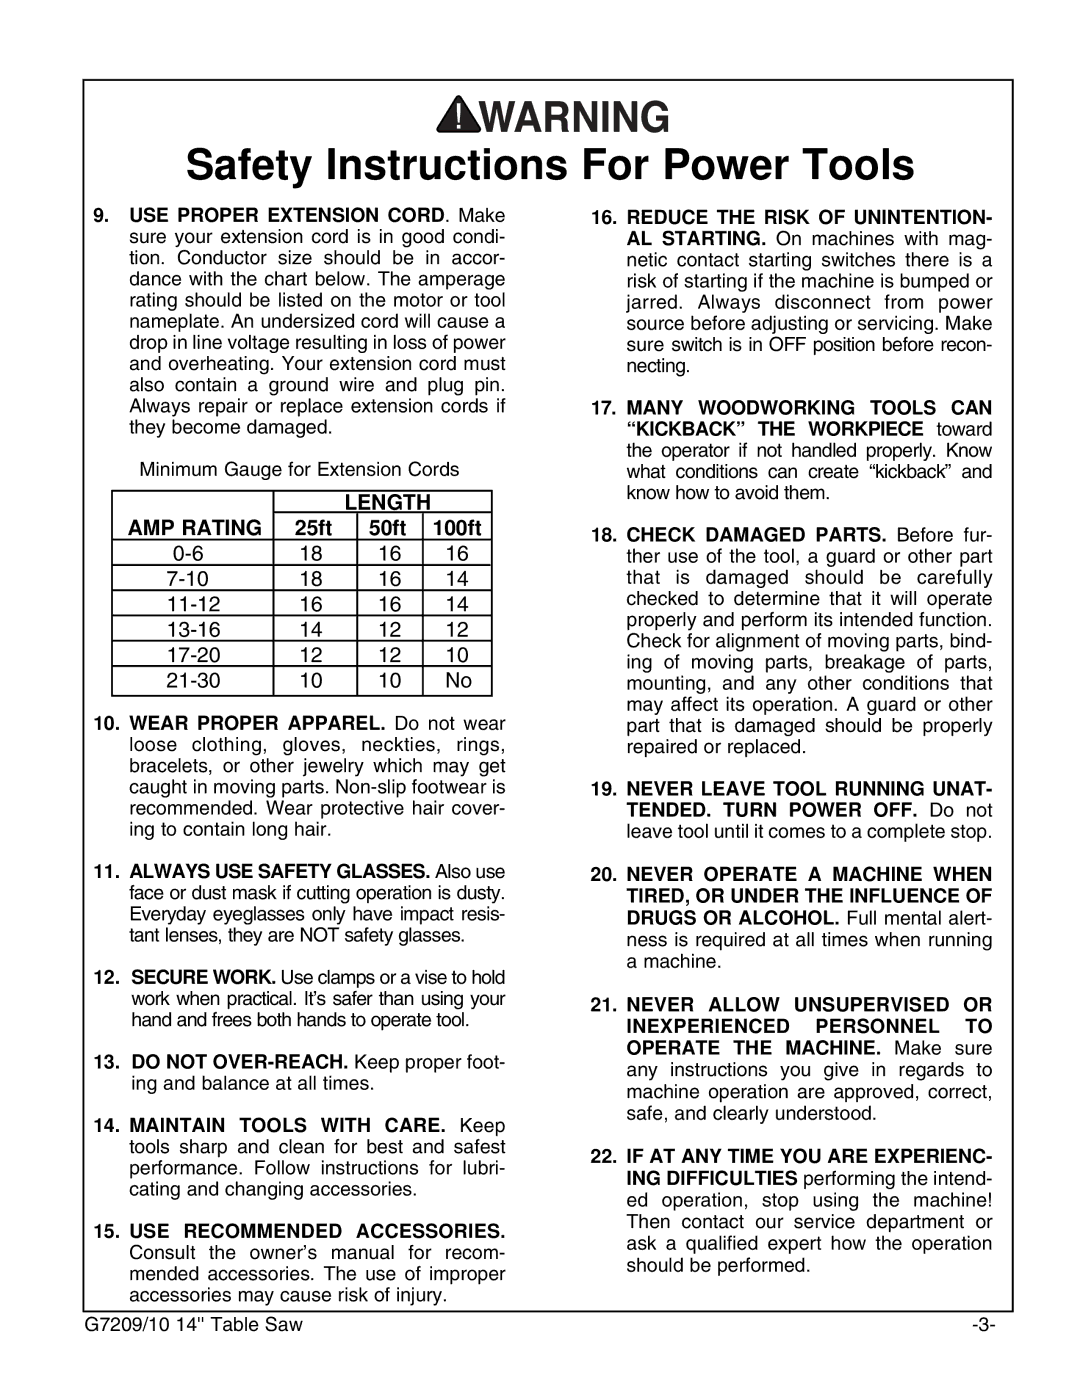 Grizzly G7209 instruction manual Length AMP Rating 